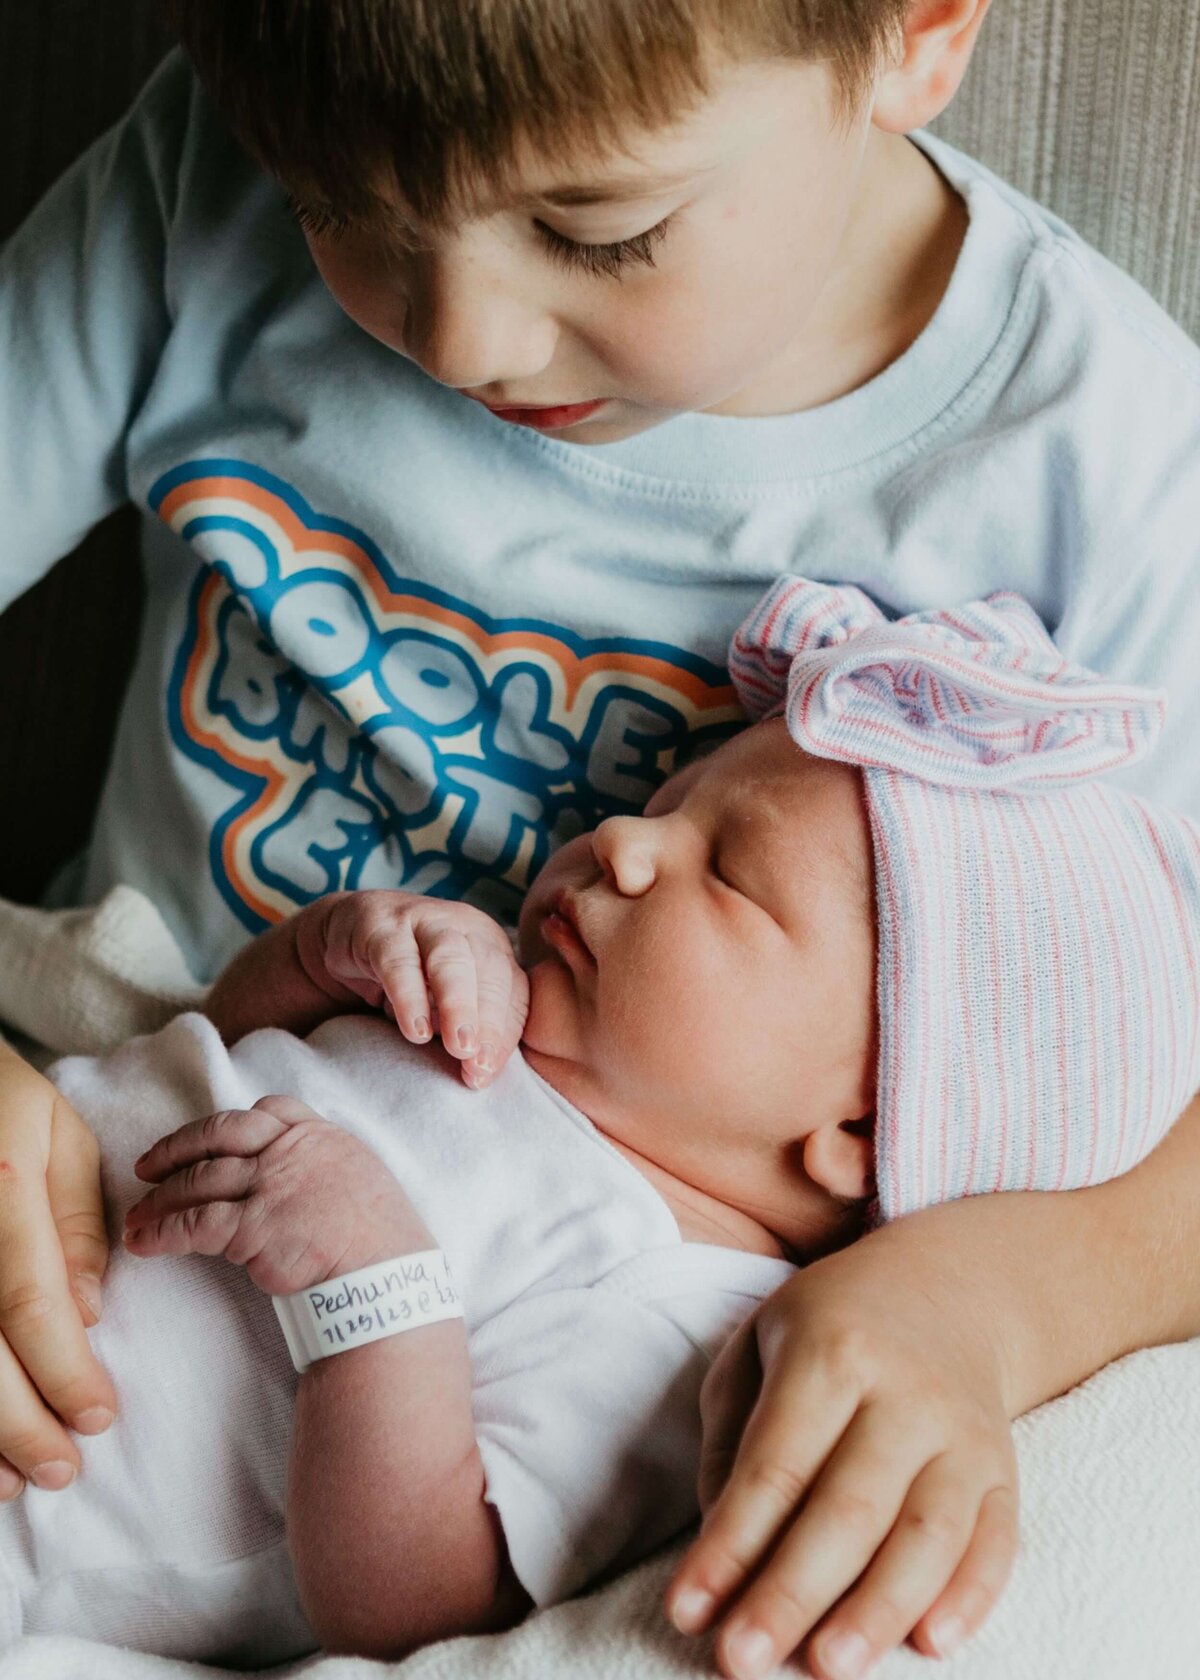 A boy lovingly cradles his new baby sister in his arms, captured by a Pittsburgh newborn photographer.